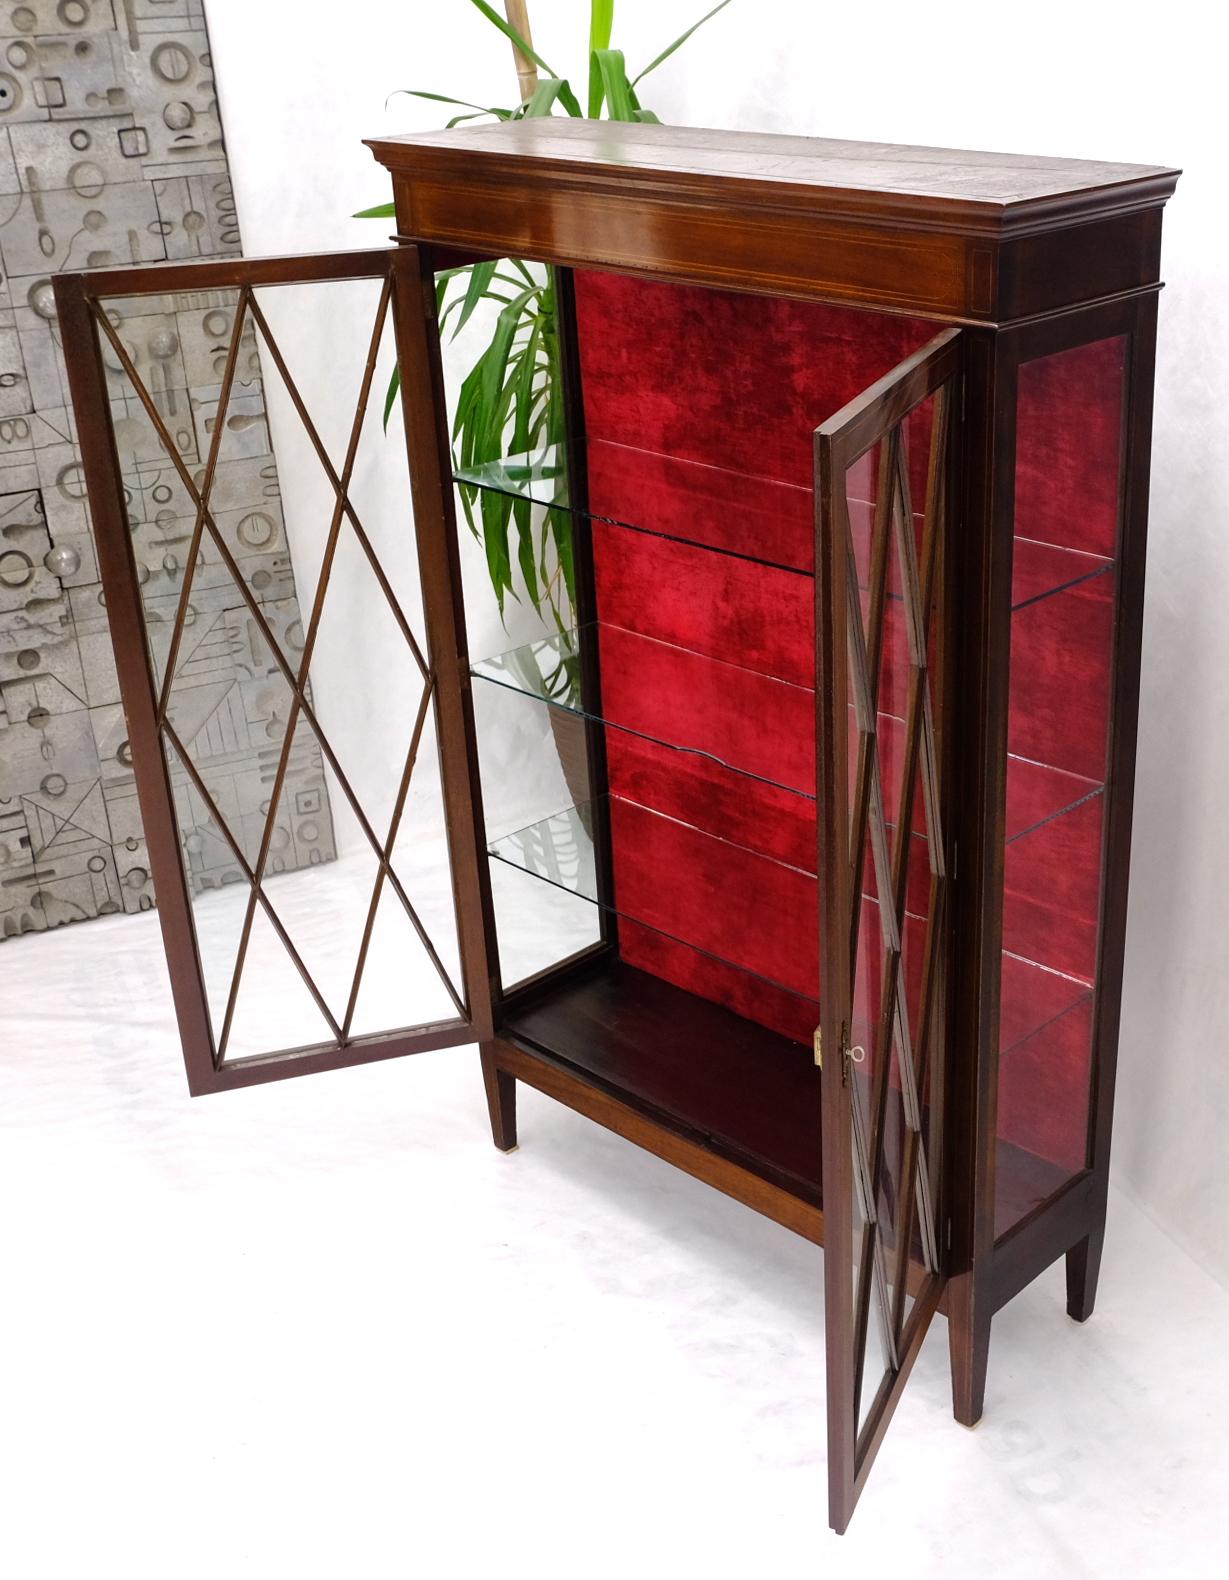 Individual Glass Pane Double Doors Pencil Inlay Flame Mahogany Show Case In Good Condition For Sale In Rockaway, NJ